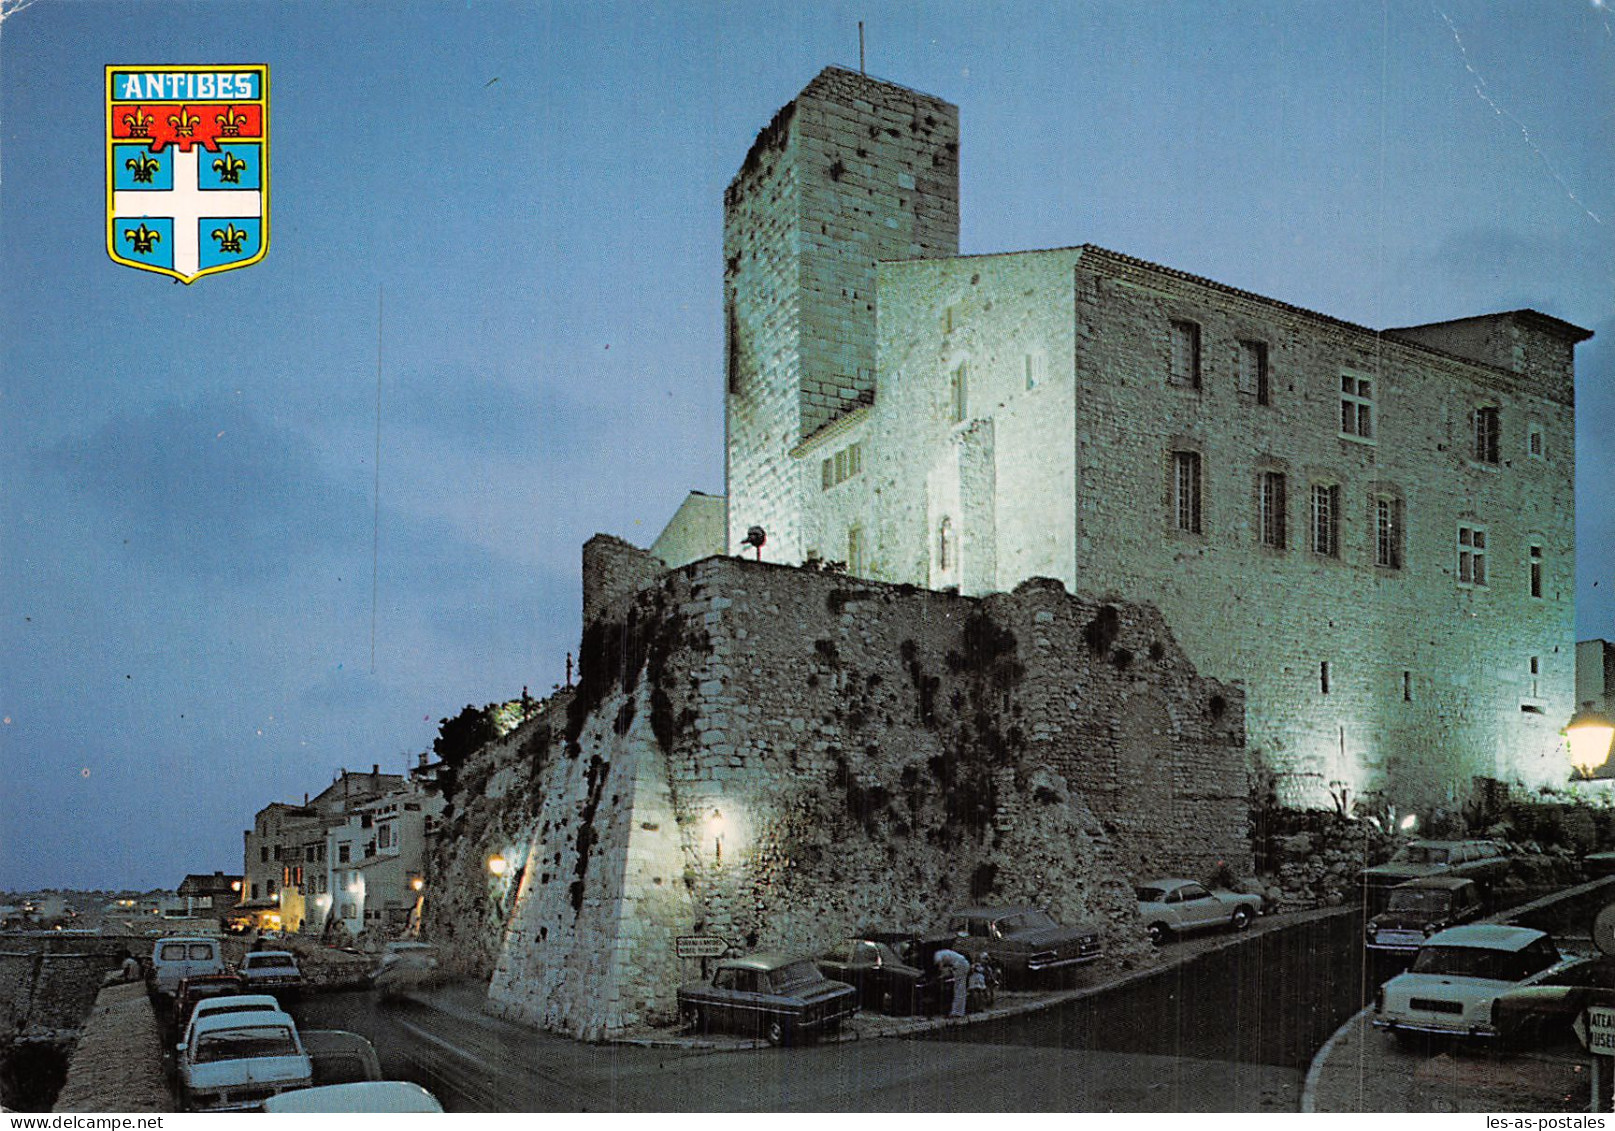 6 ANTIBES LES REMPARTS - Antibes - Les Remparts